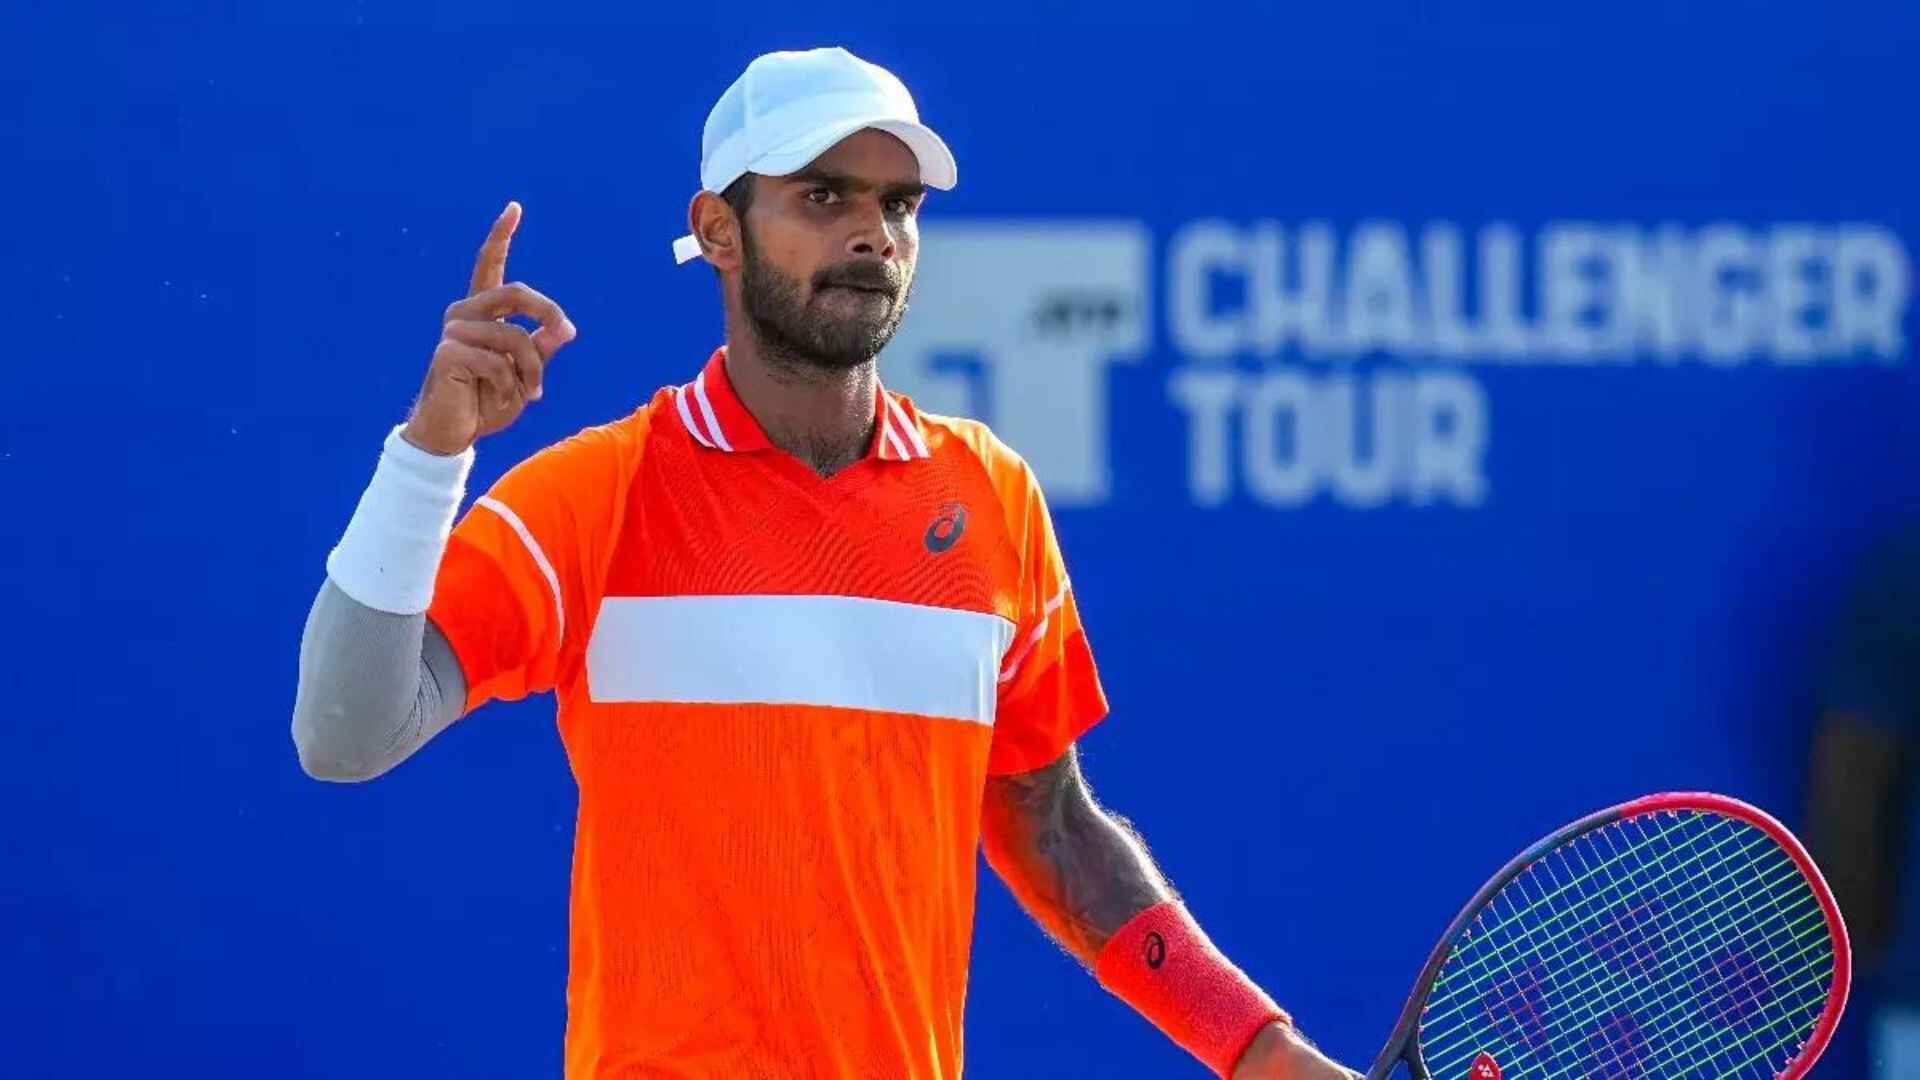 Sumit Nagal comes to 77th position in ATP rankings